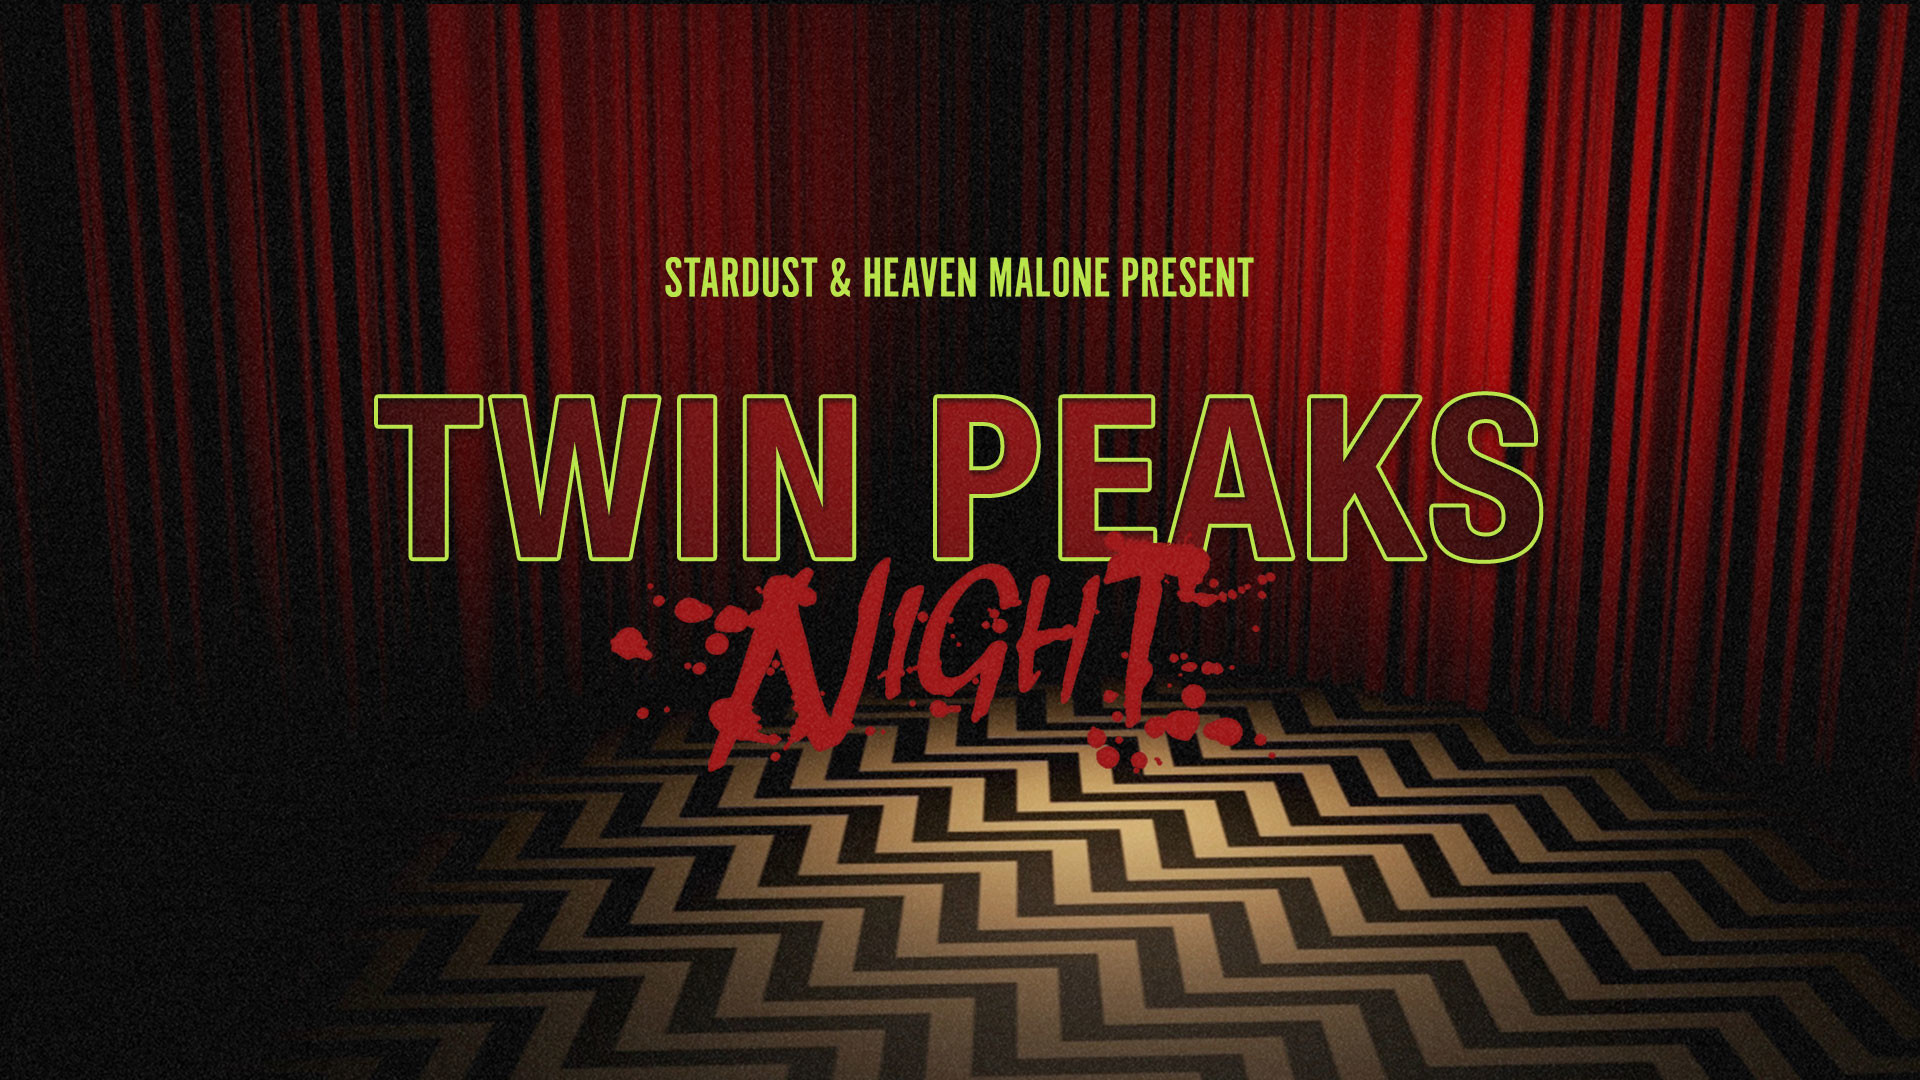 Twin Peaks Night – Drag Burlesque Dance Party – June 1, 2017 at Berlin Nightclub, Chicago – DJ sets by Heaven Malone